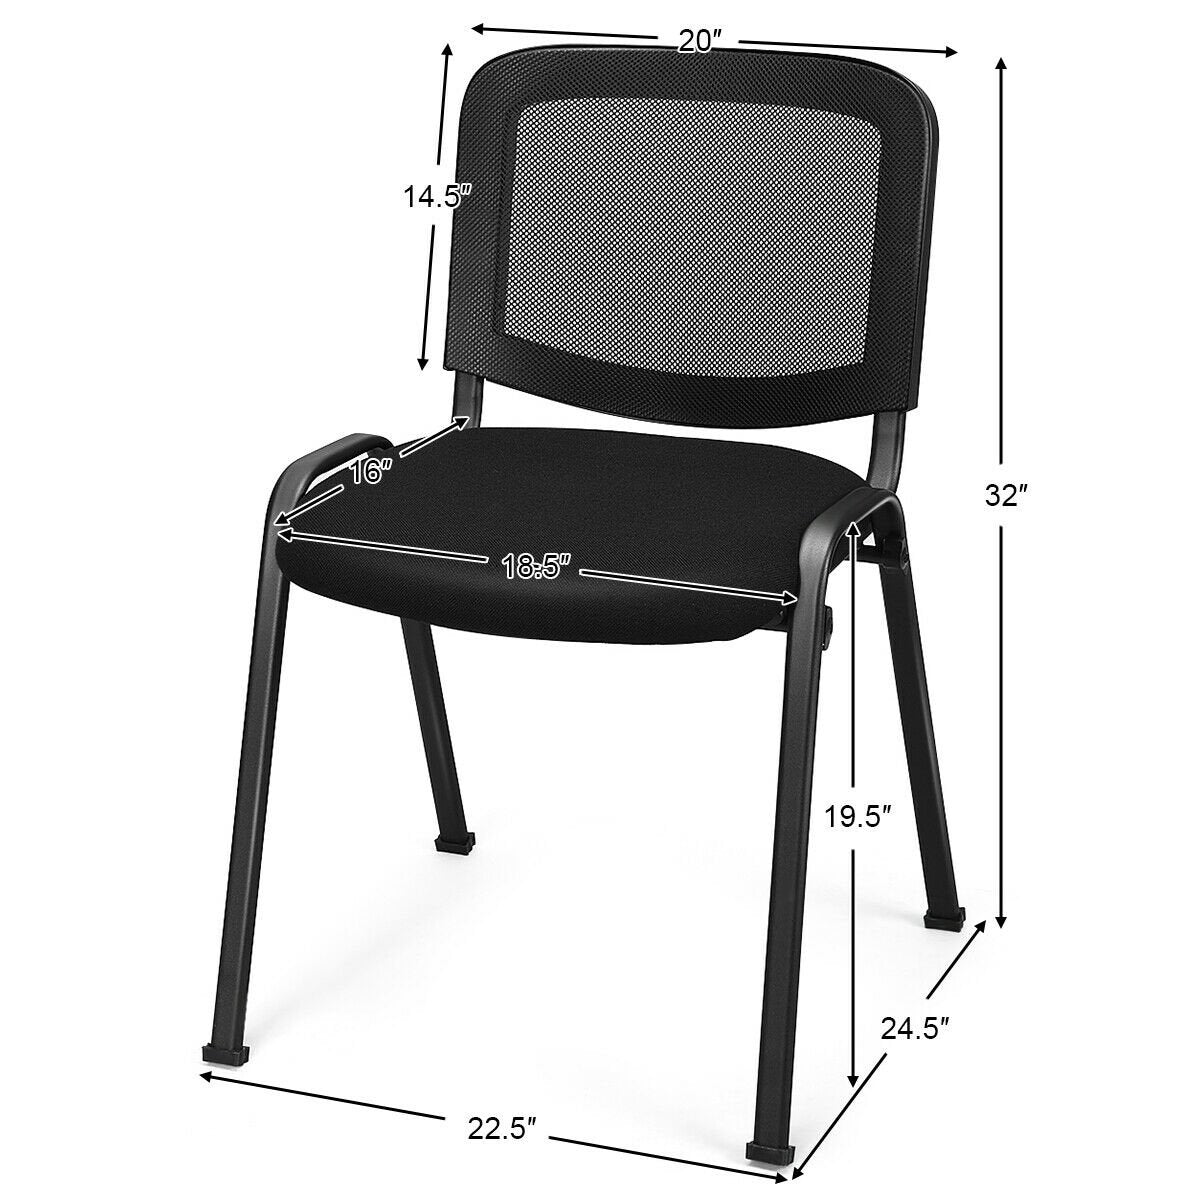 Set of 5 Stackable Conference Chairs with Mesh Back, Black at Gallery Canada